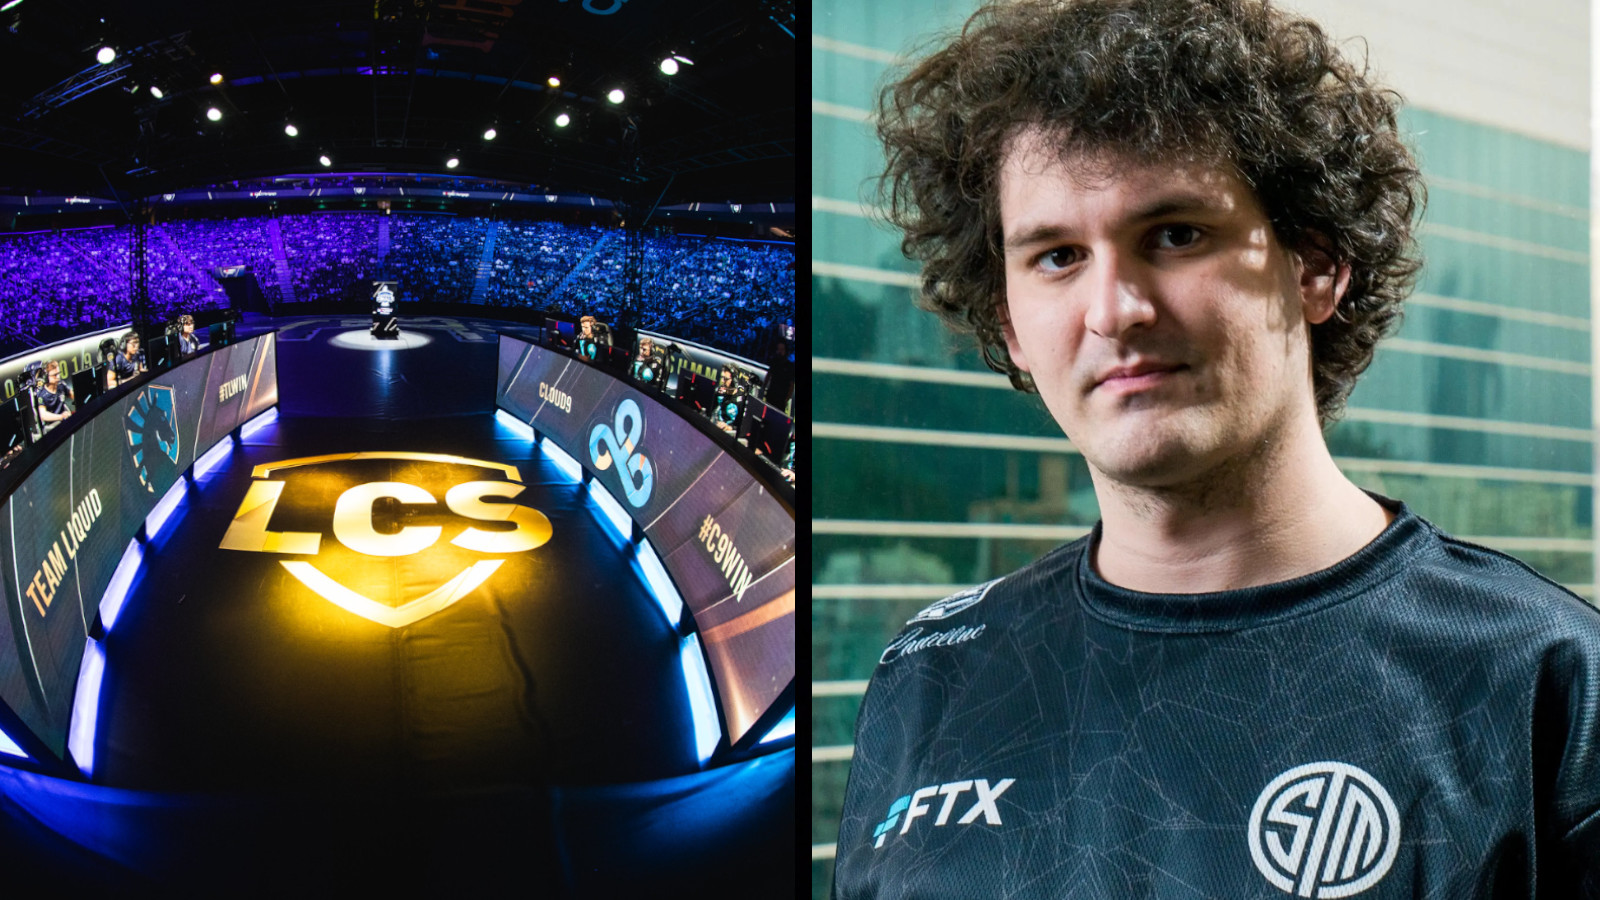 Riot Games attempts to cut off $96 million FTX deal with LCS - Dexerto